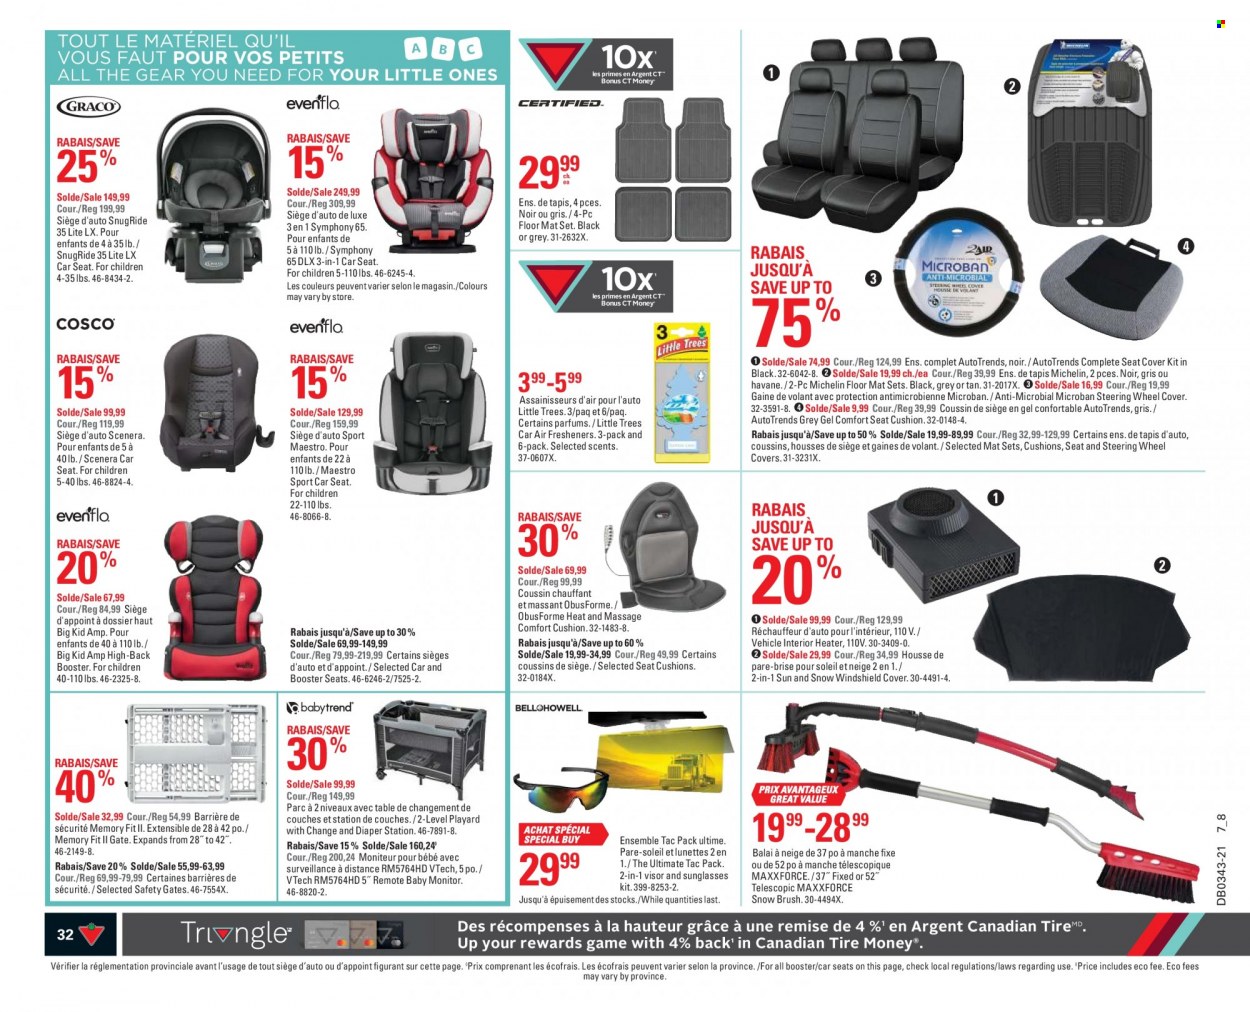 thumbnail - Canadian Tire Flyer - October 21, 2021 - October 27, 2021 - Sales products - air freshener, cushion, baby monitor, table, Vtech, vehicle, baby car seat, car seat cover, car floor mats, wheel covers, Michelin. Page 32.